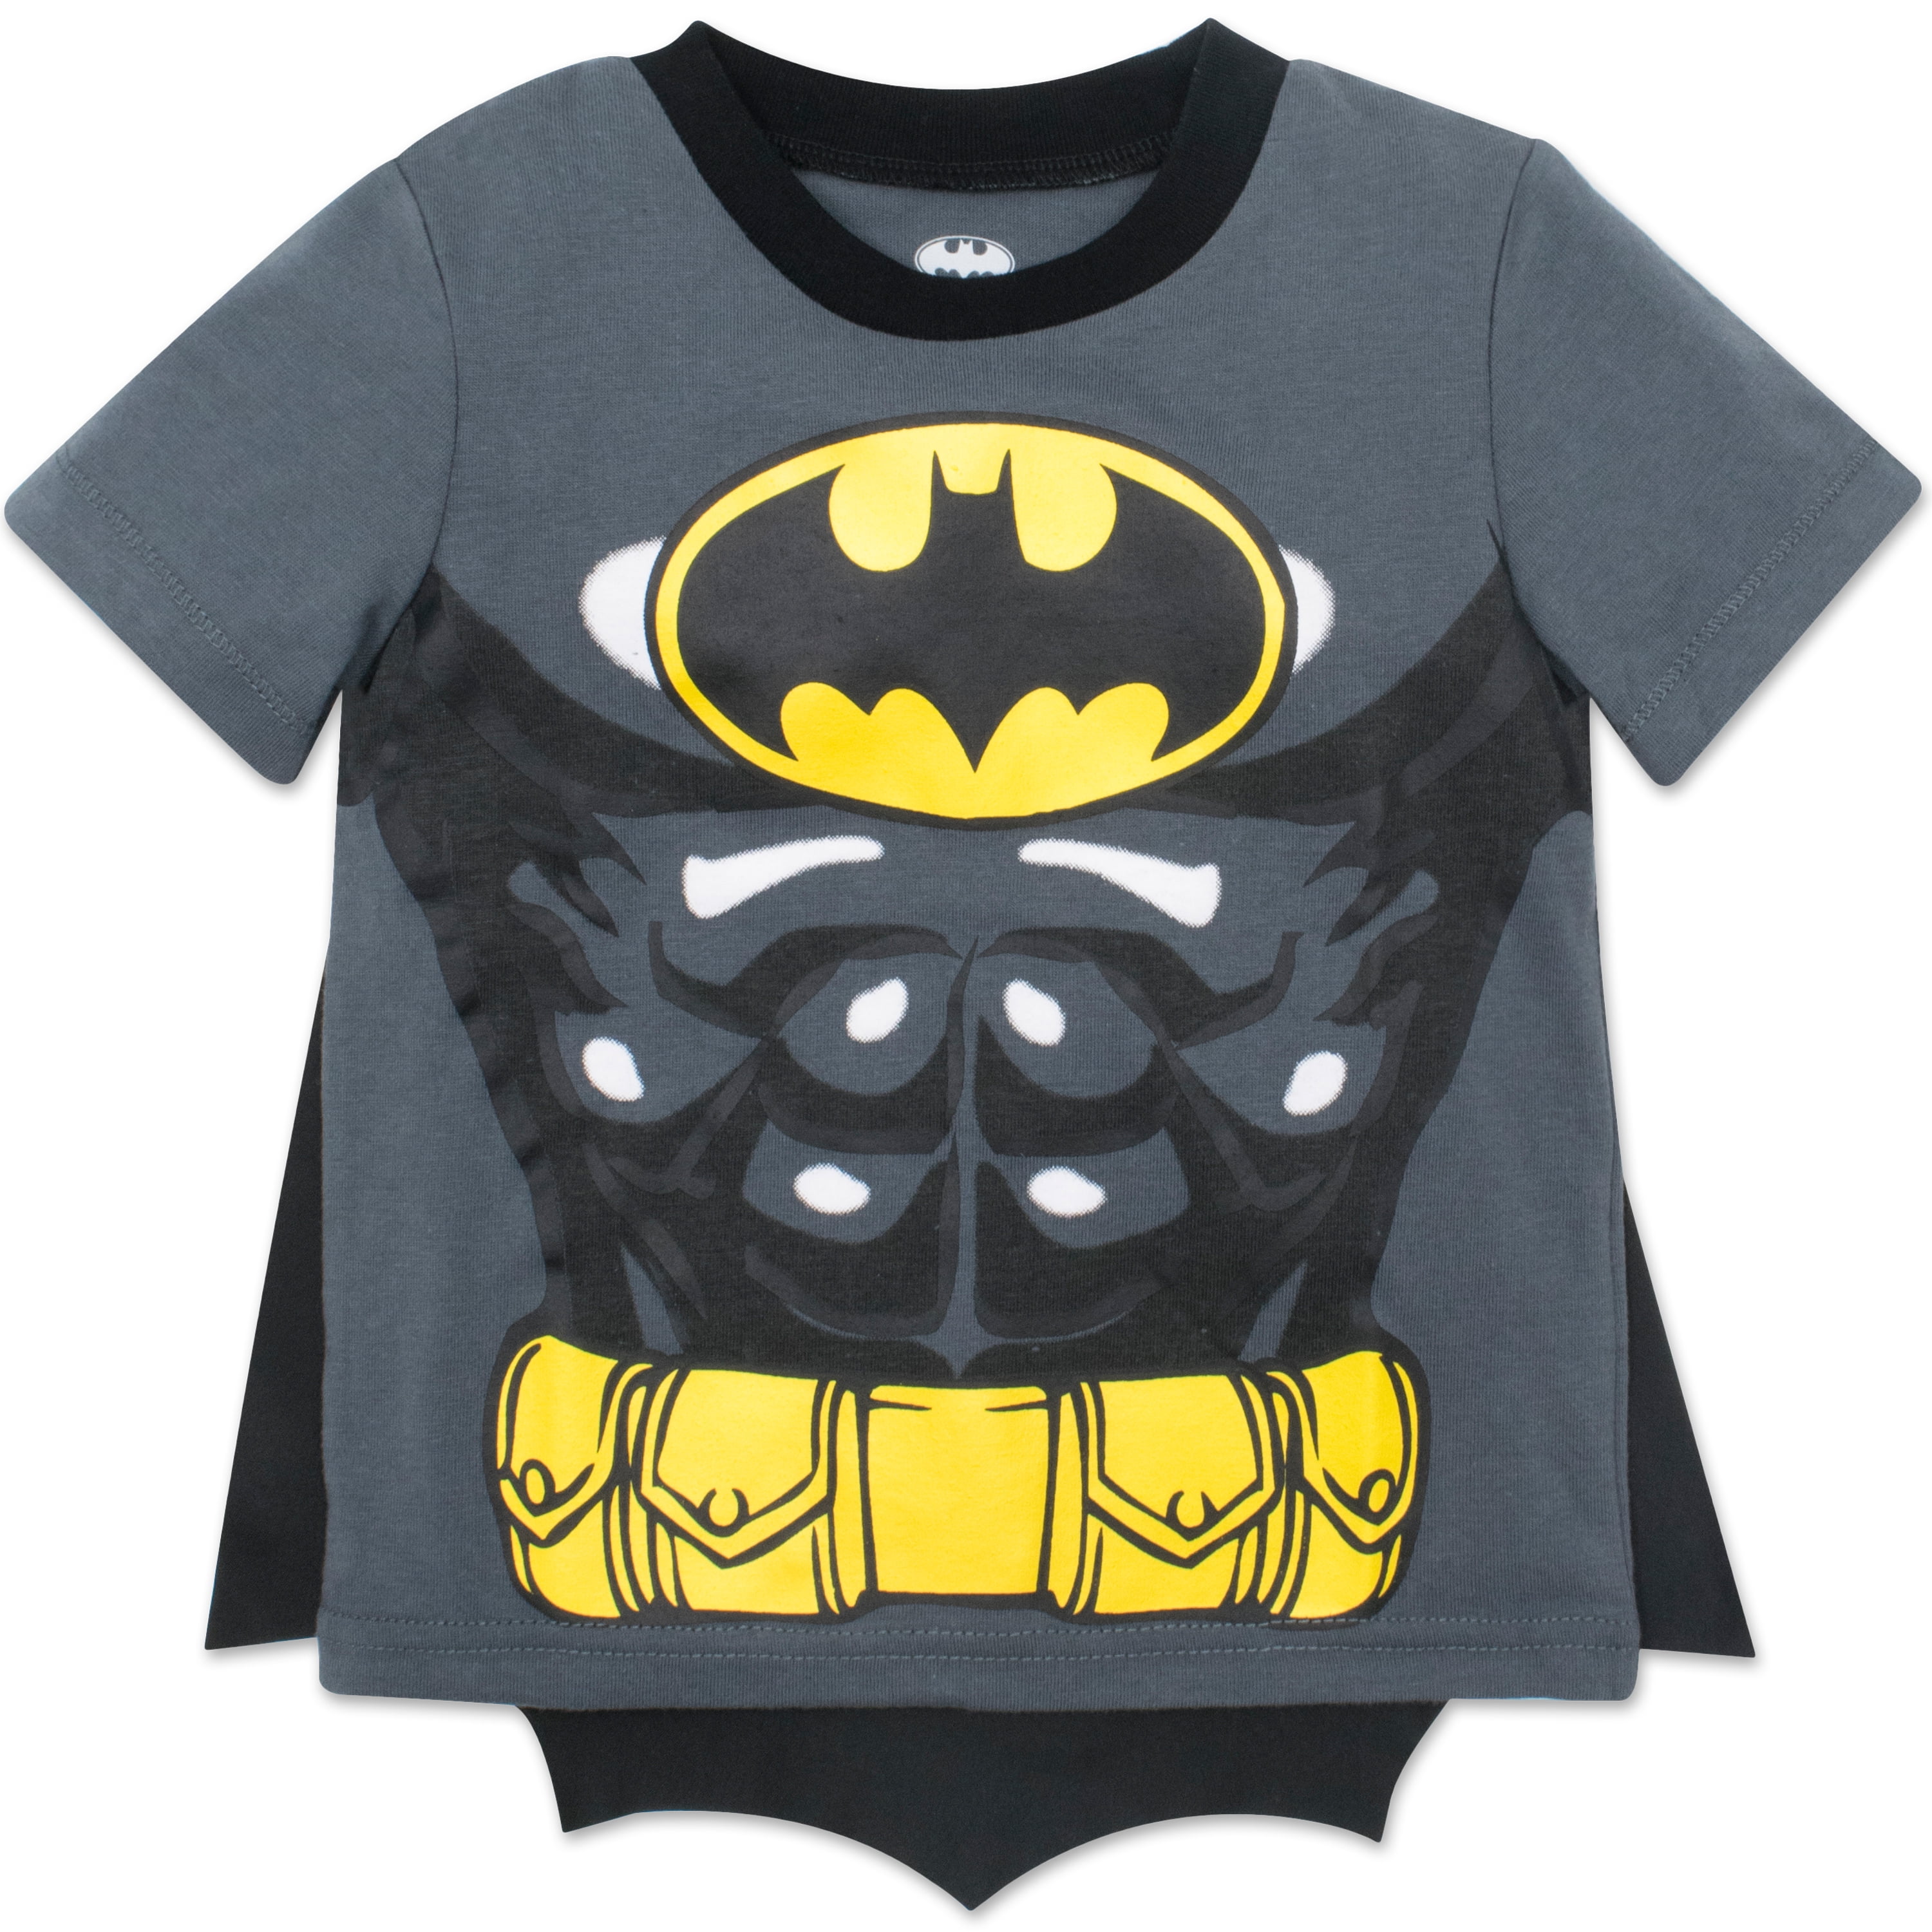 Details about  / 2 tank tops-Batman and Spiderman Toddler Boys 3D Graphic Tank Tops Size 5T NWT